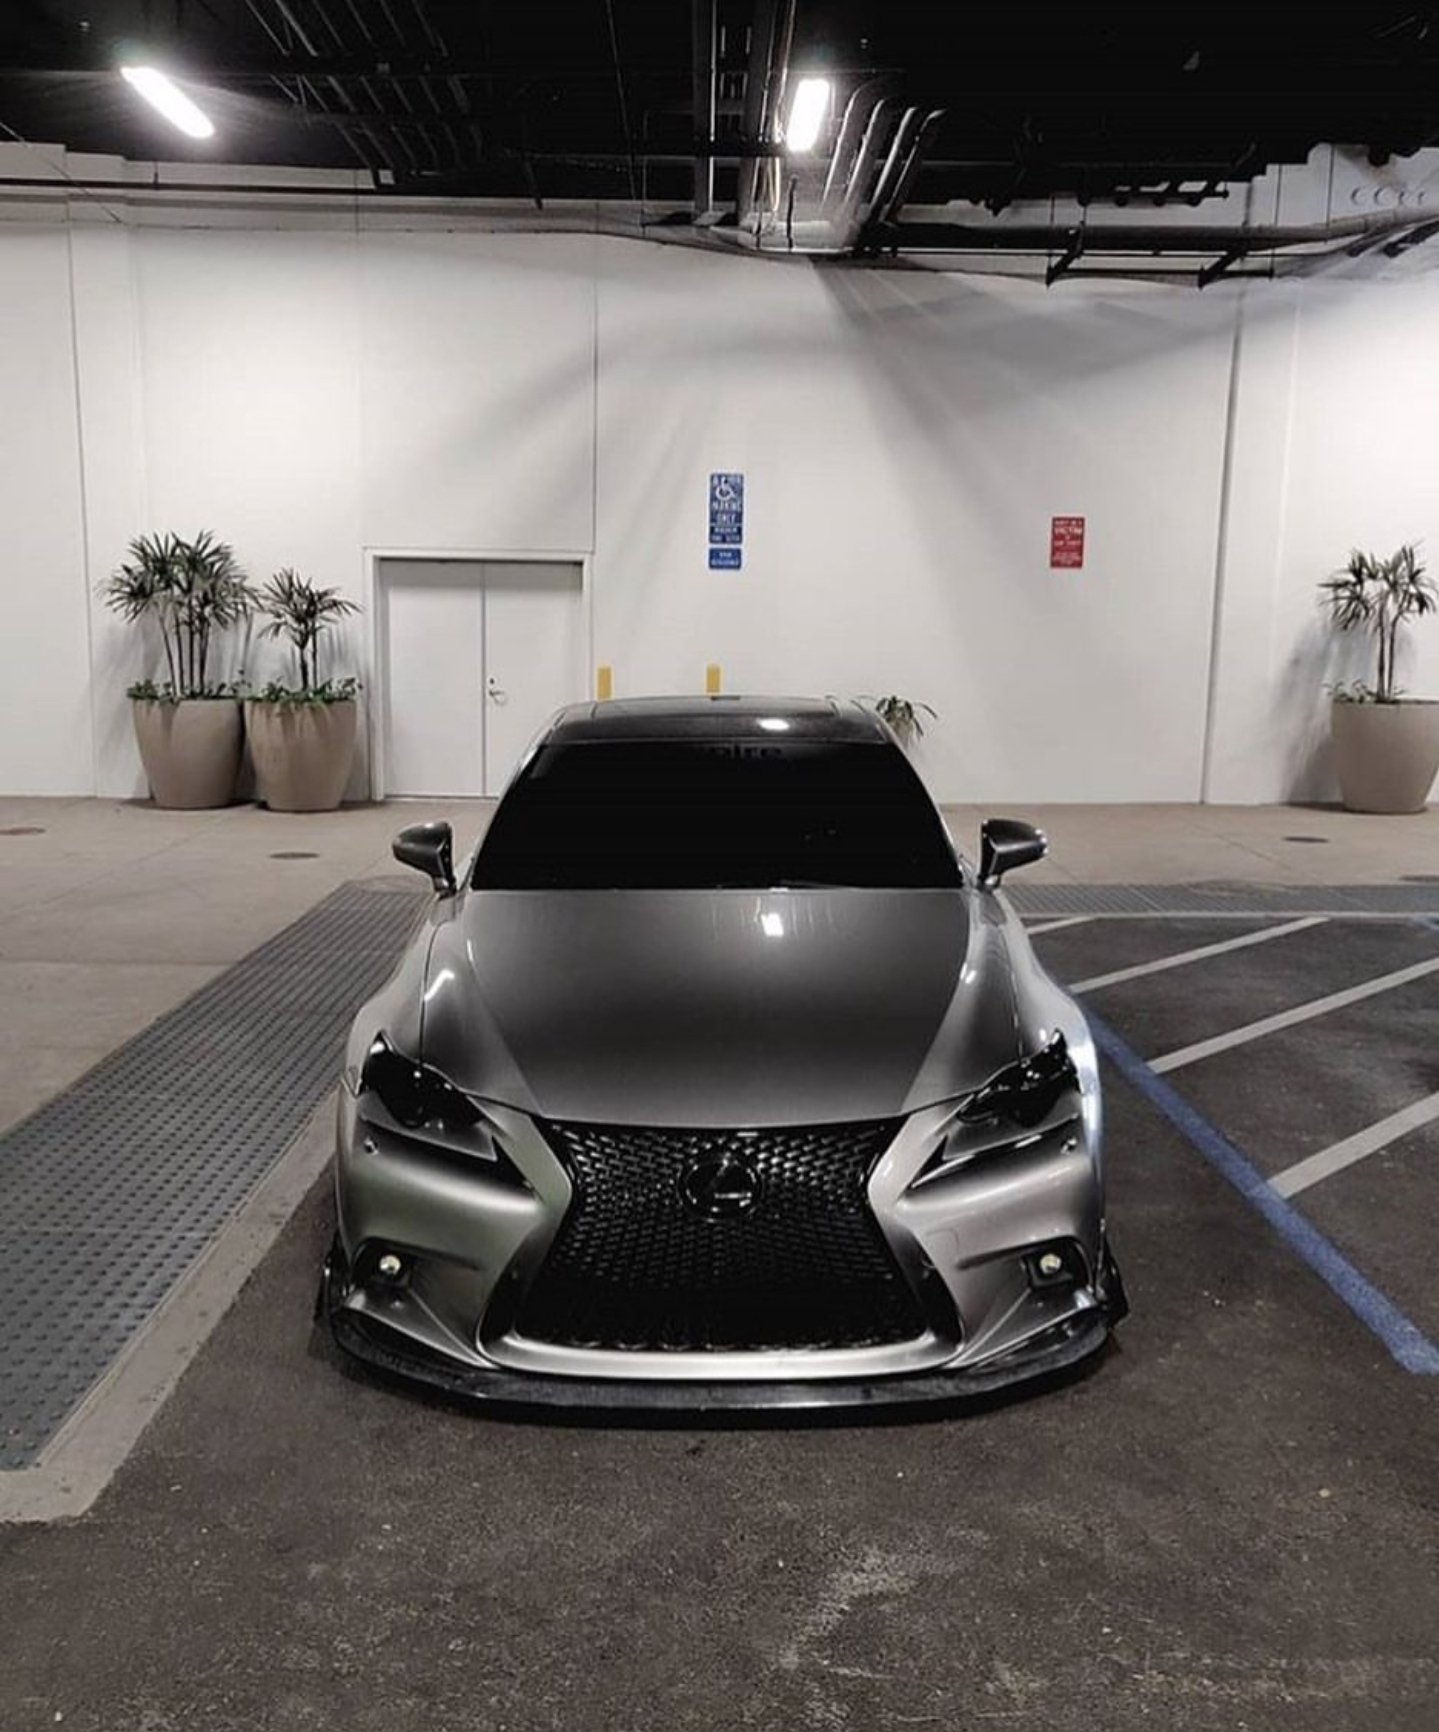 The Grinch's Content - Seite 5 - Lexus Owners Club Europe